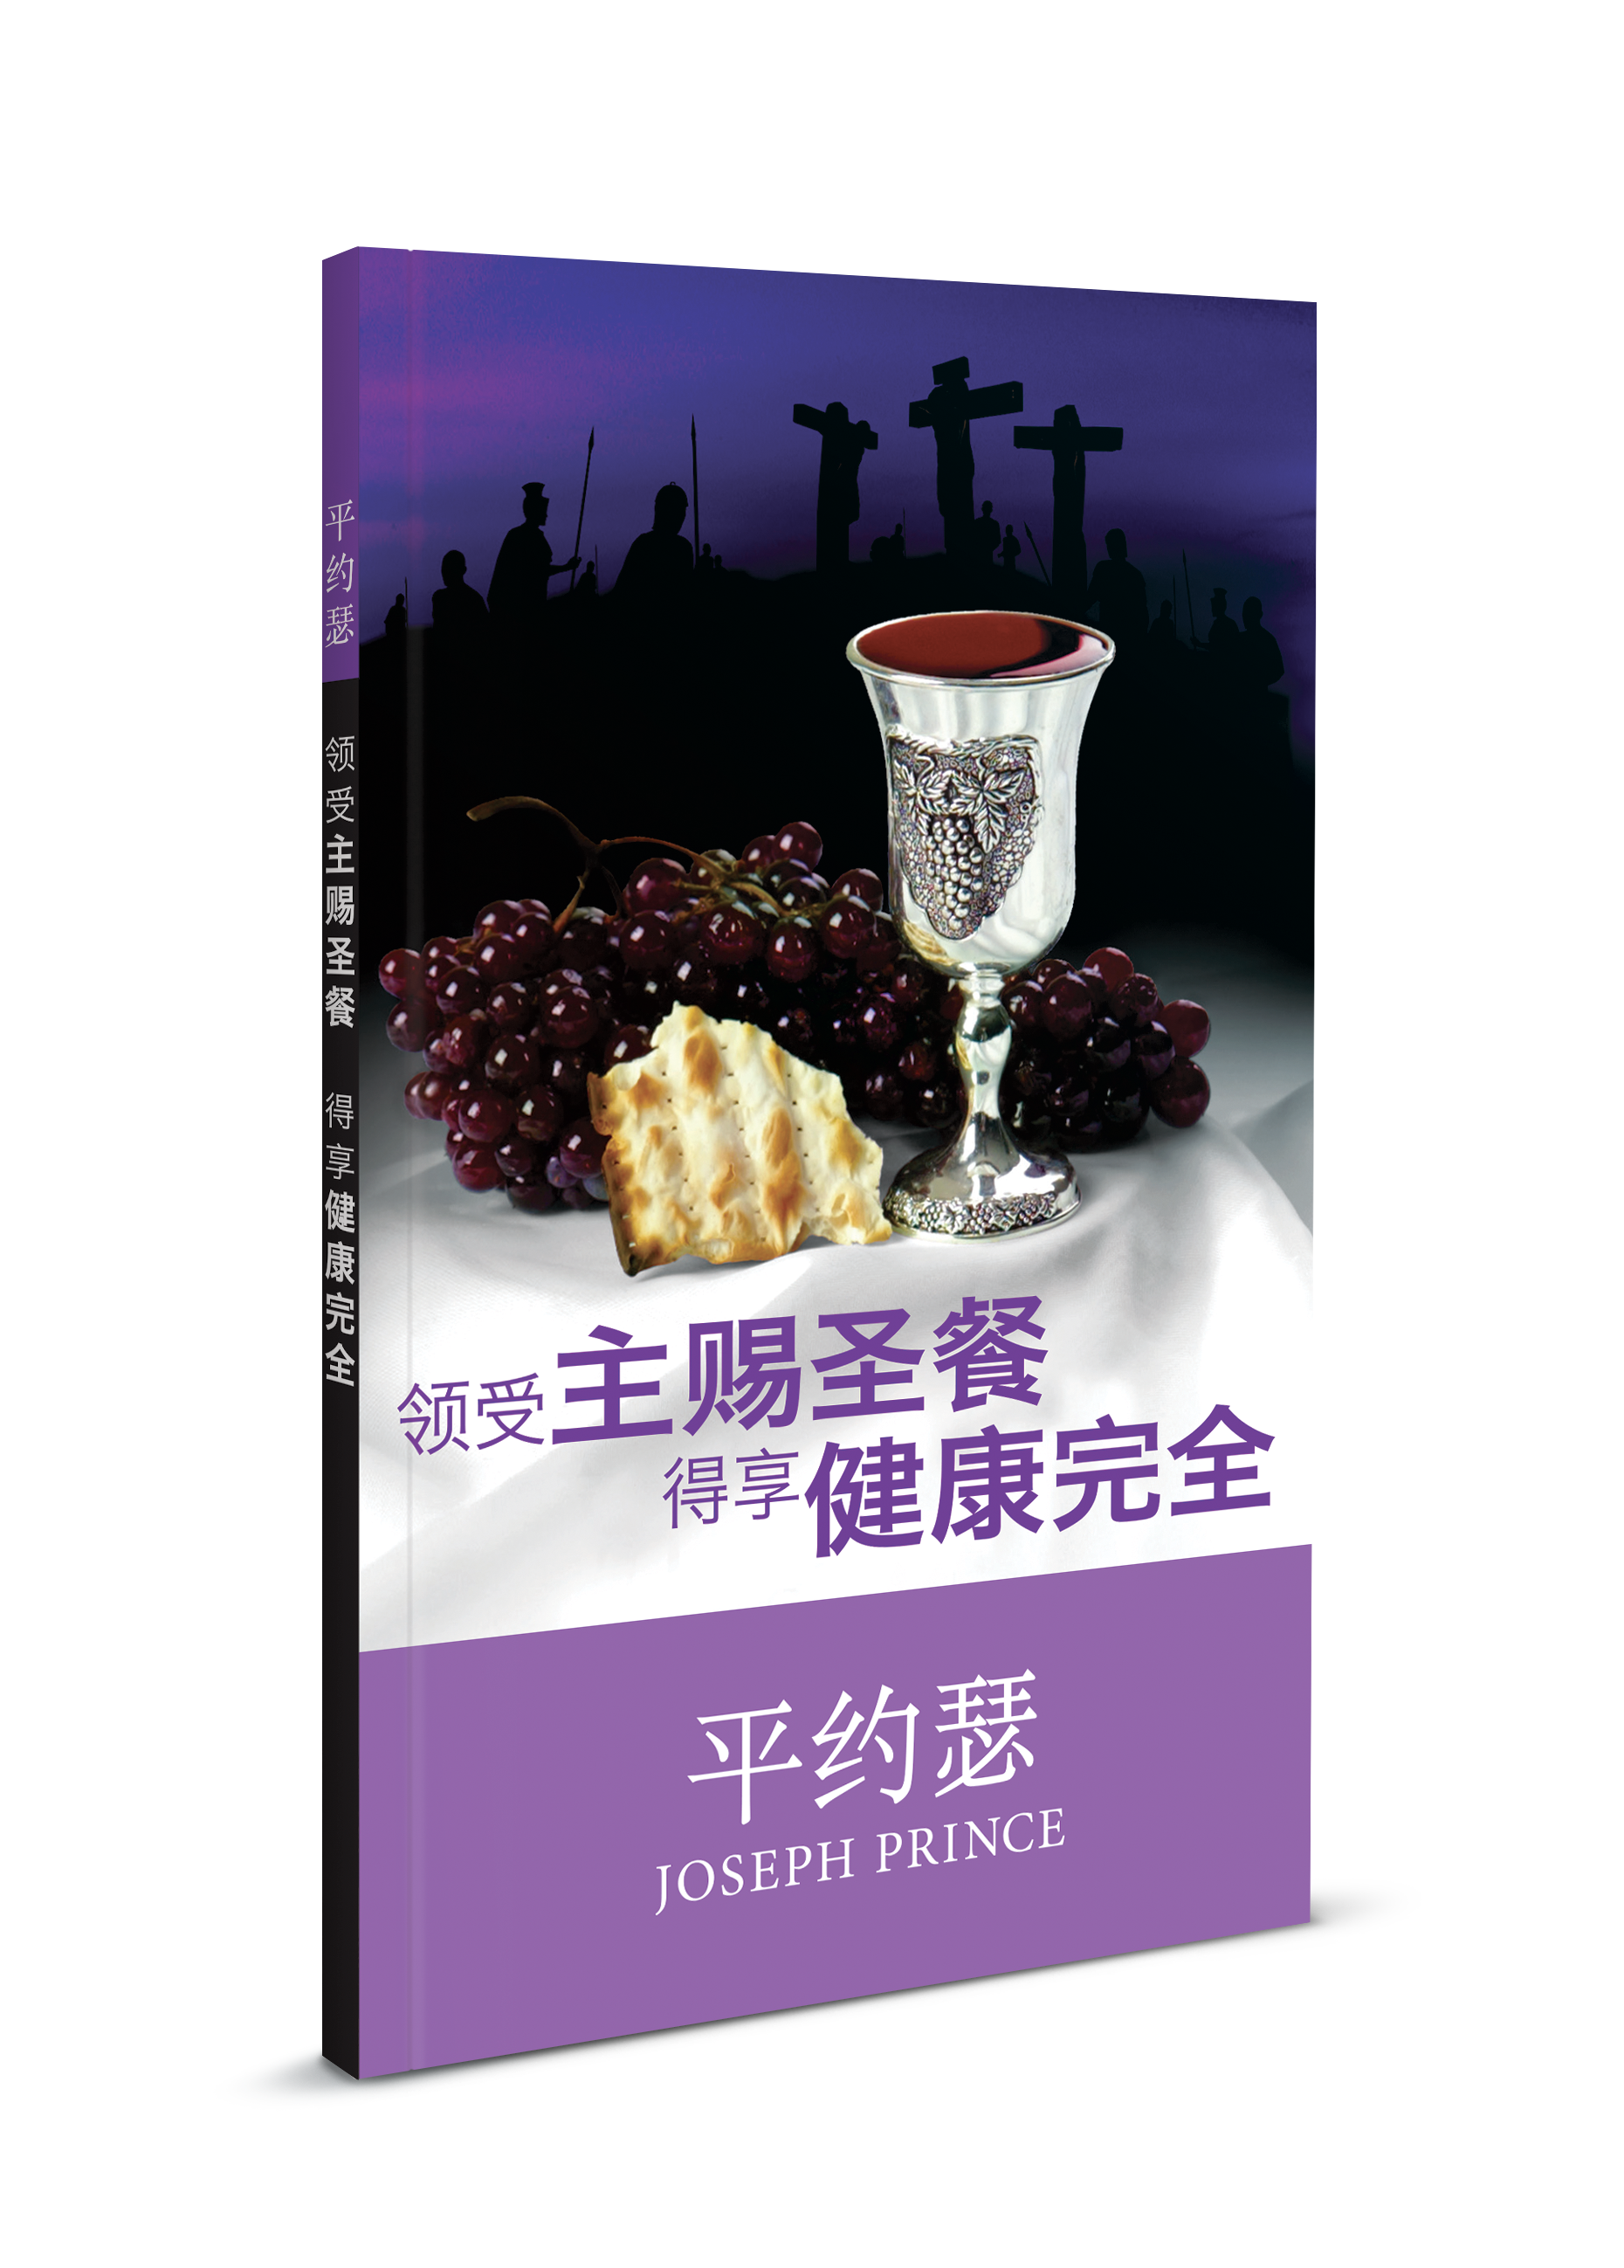 ROCKONLINE | New Creation Church | Joseph Prince | ROCK Bookshop | NCC | Christian Living | 领受主赐圣餐得享健康完全 (Health & Wholeness Through The Holy Communion – Simplified Chinese) | Free shipping for Singapore orders above $50